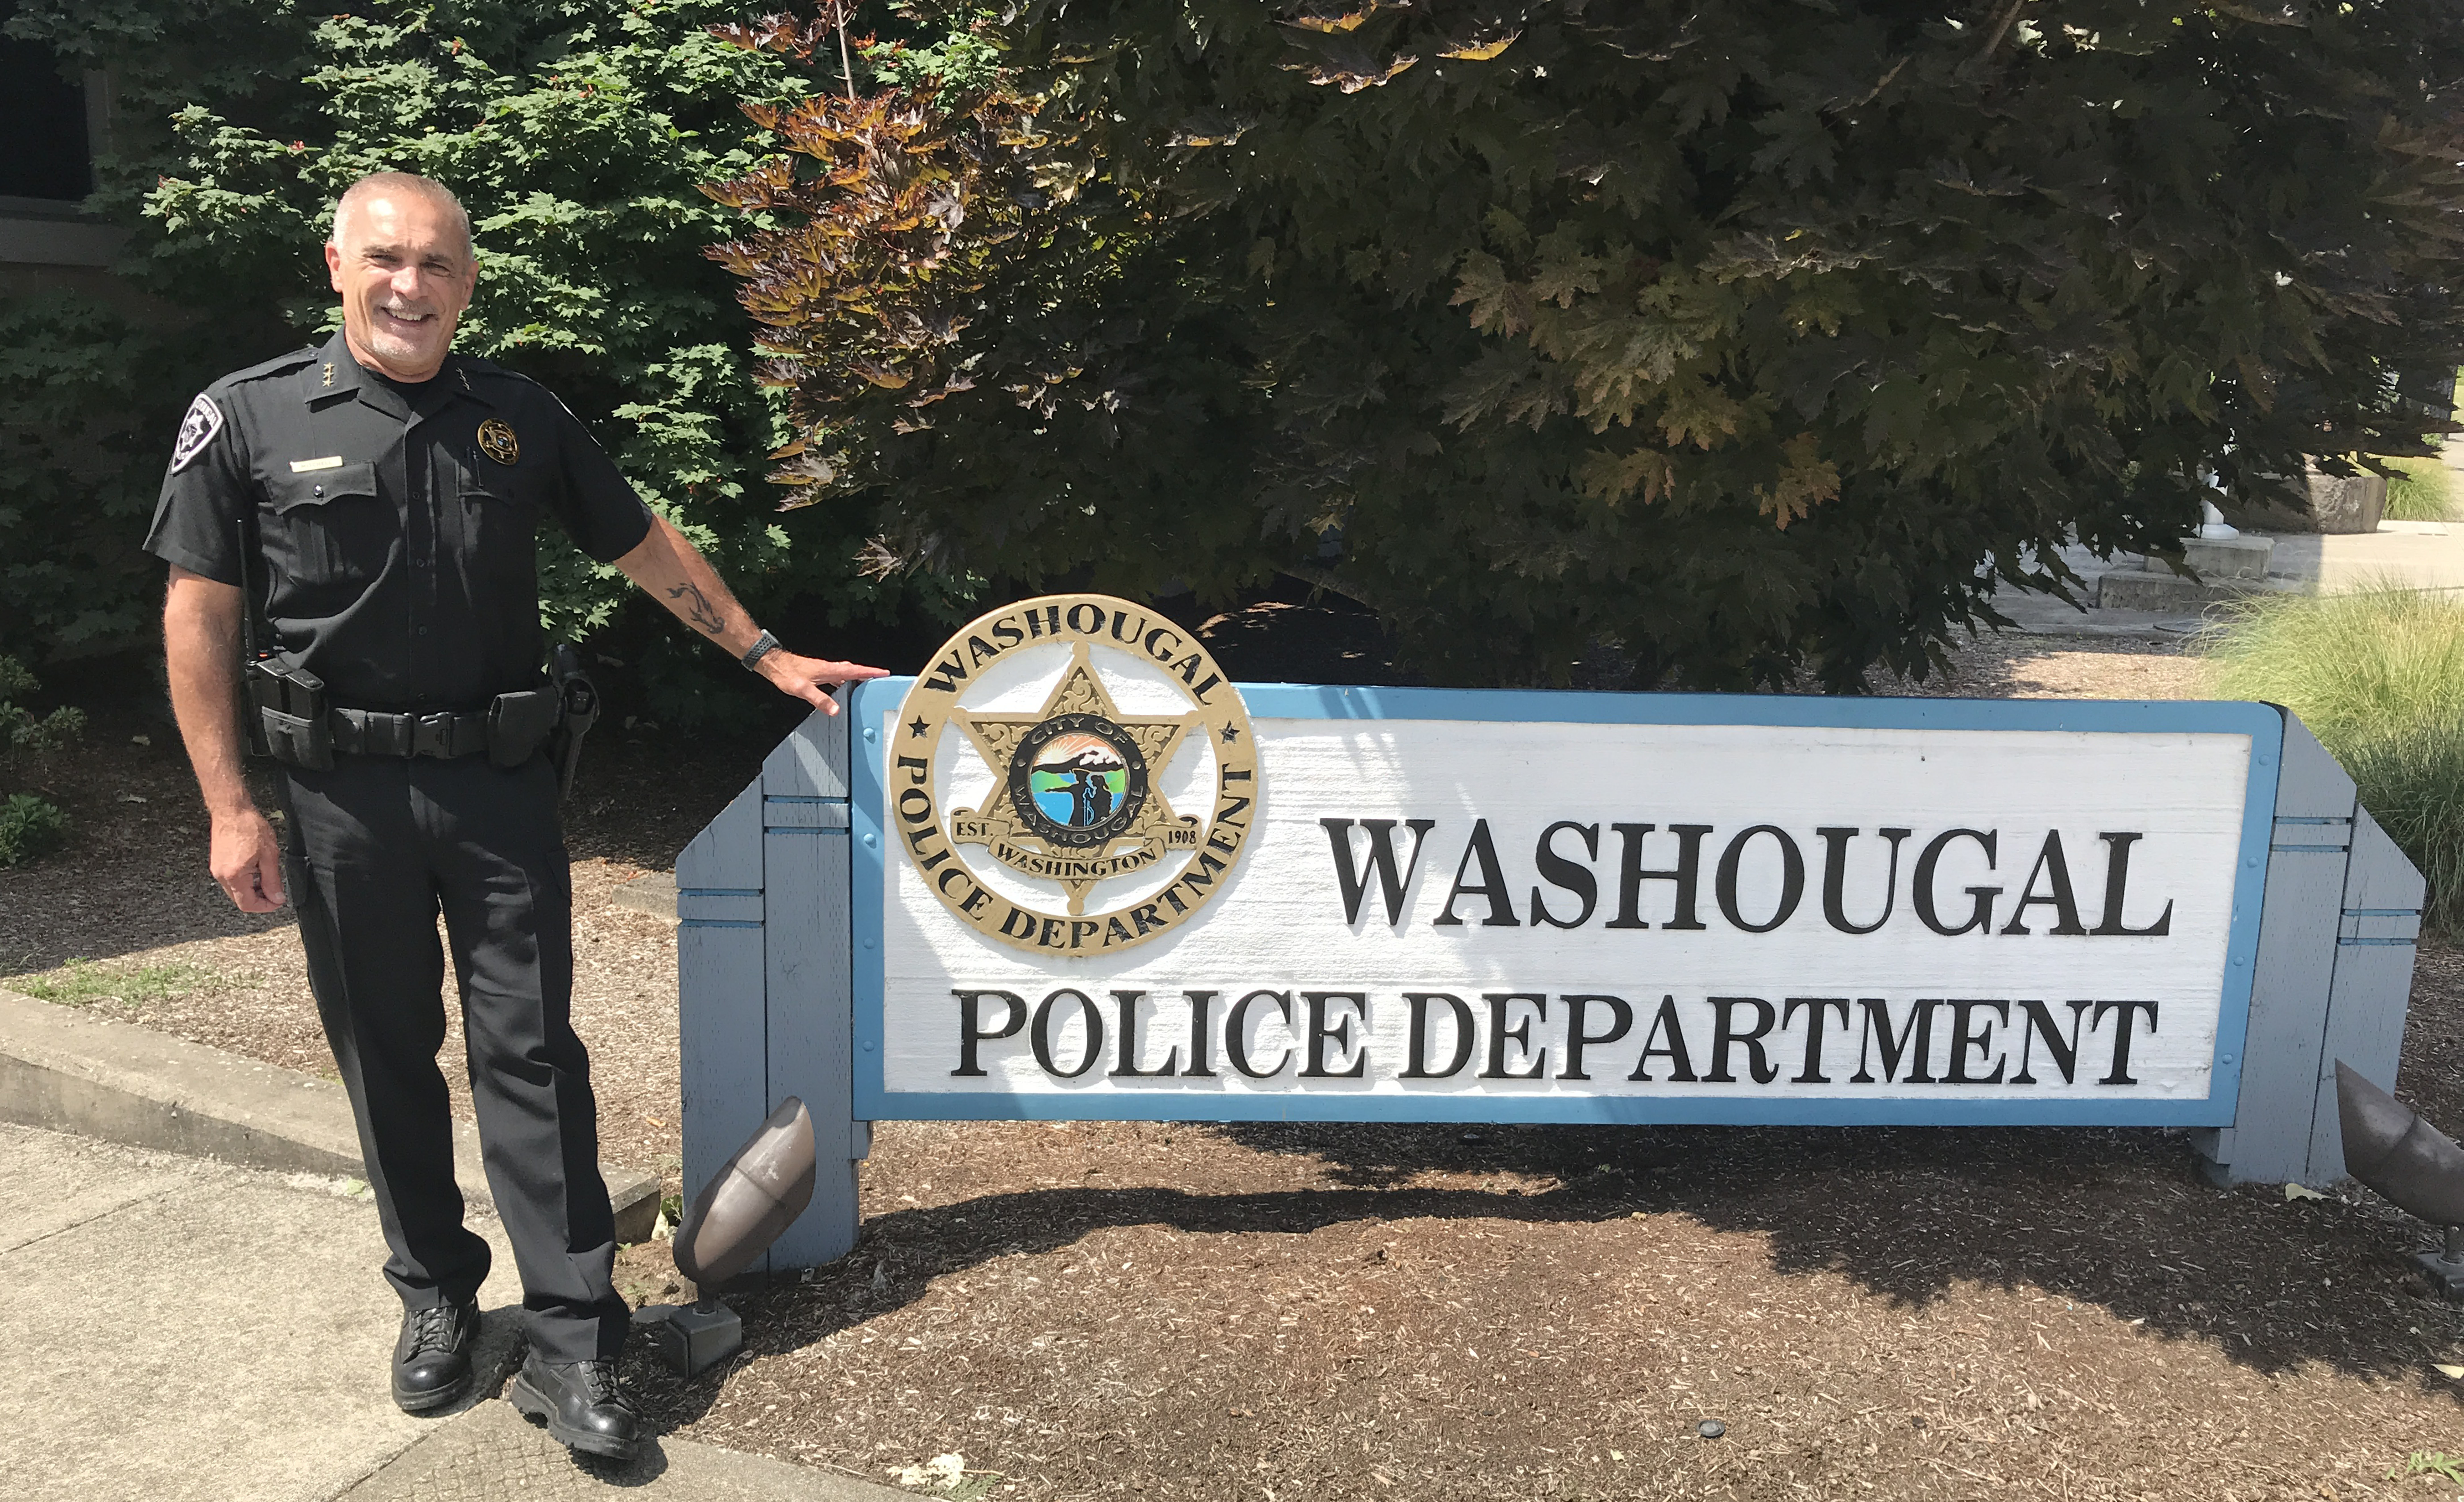 Washougal Police Department chief Ron Mitchell will retire later this year, ending a 23-year career.